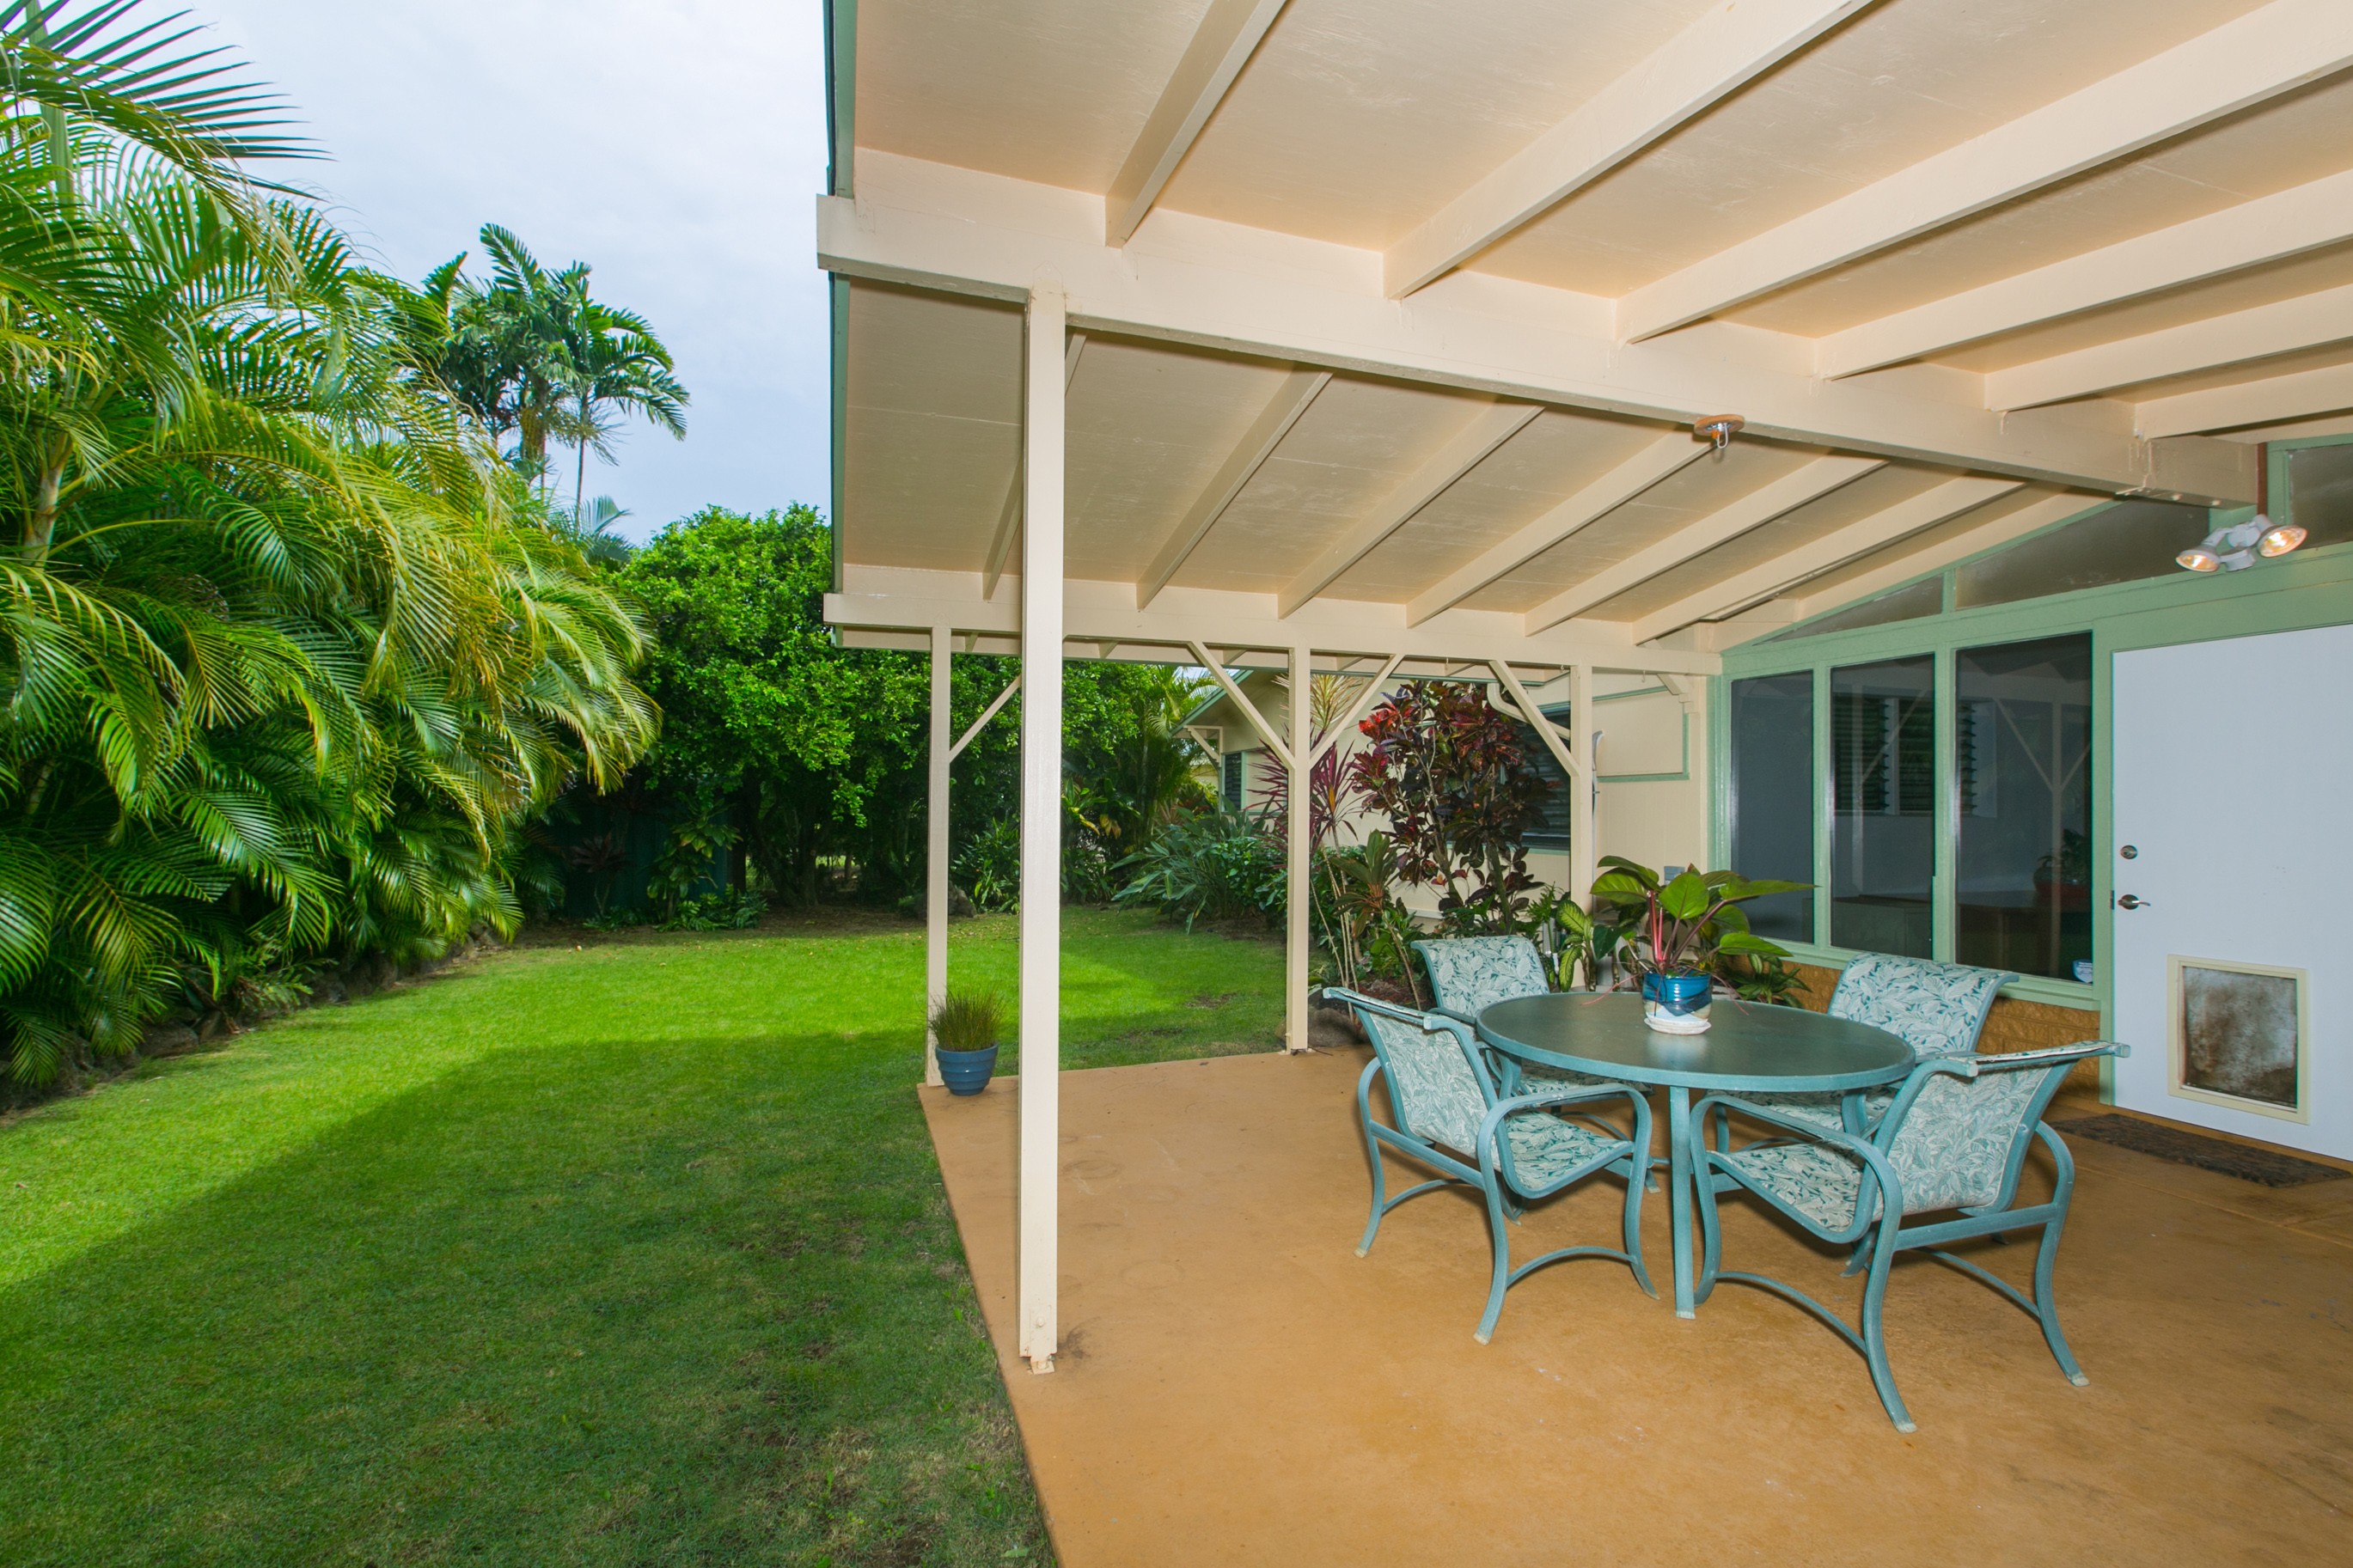 Olomana Kailua Home For Sale Lush And Gorgeous With Owned Pv Hawaii Real Estate Market Trends Hawaii Life